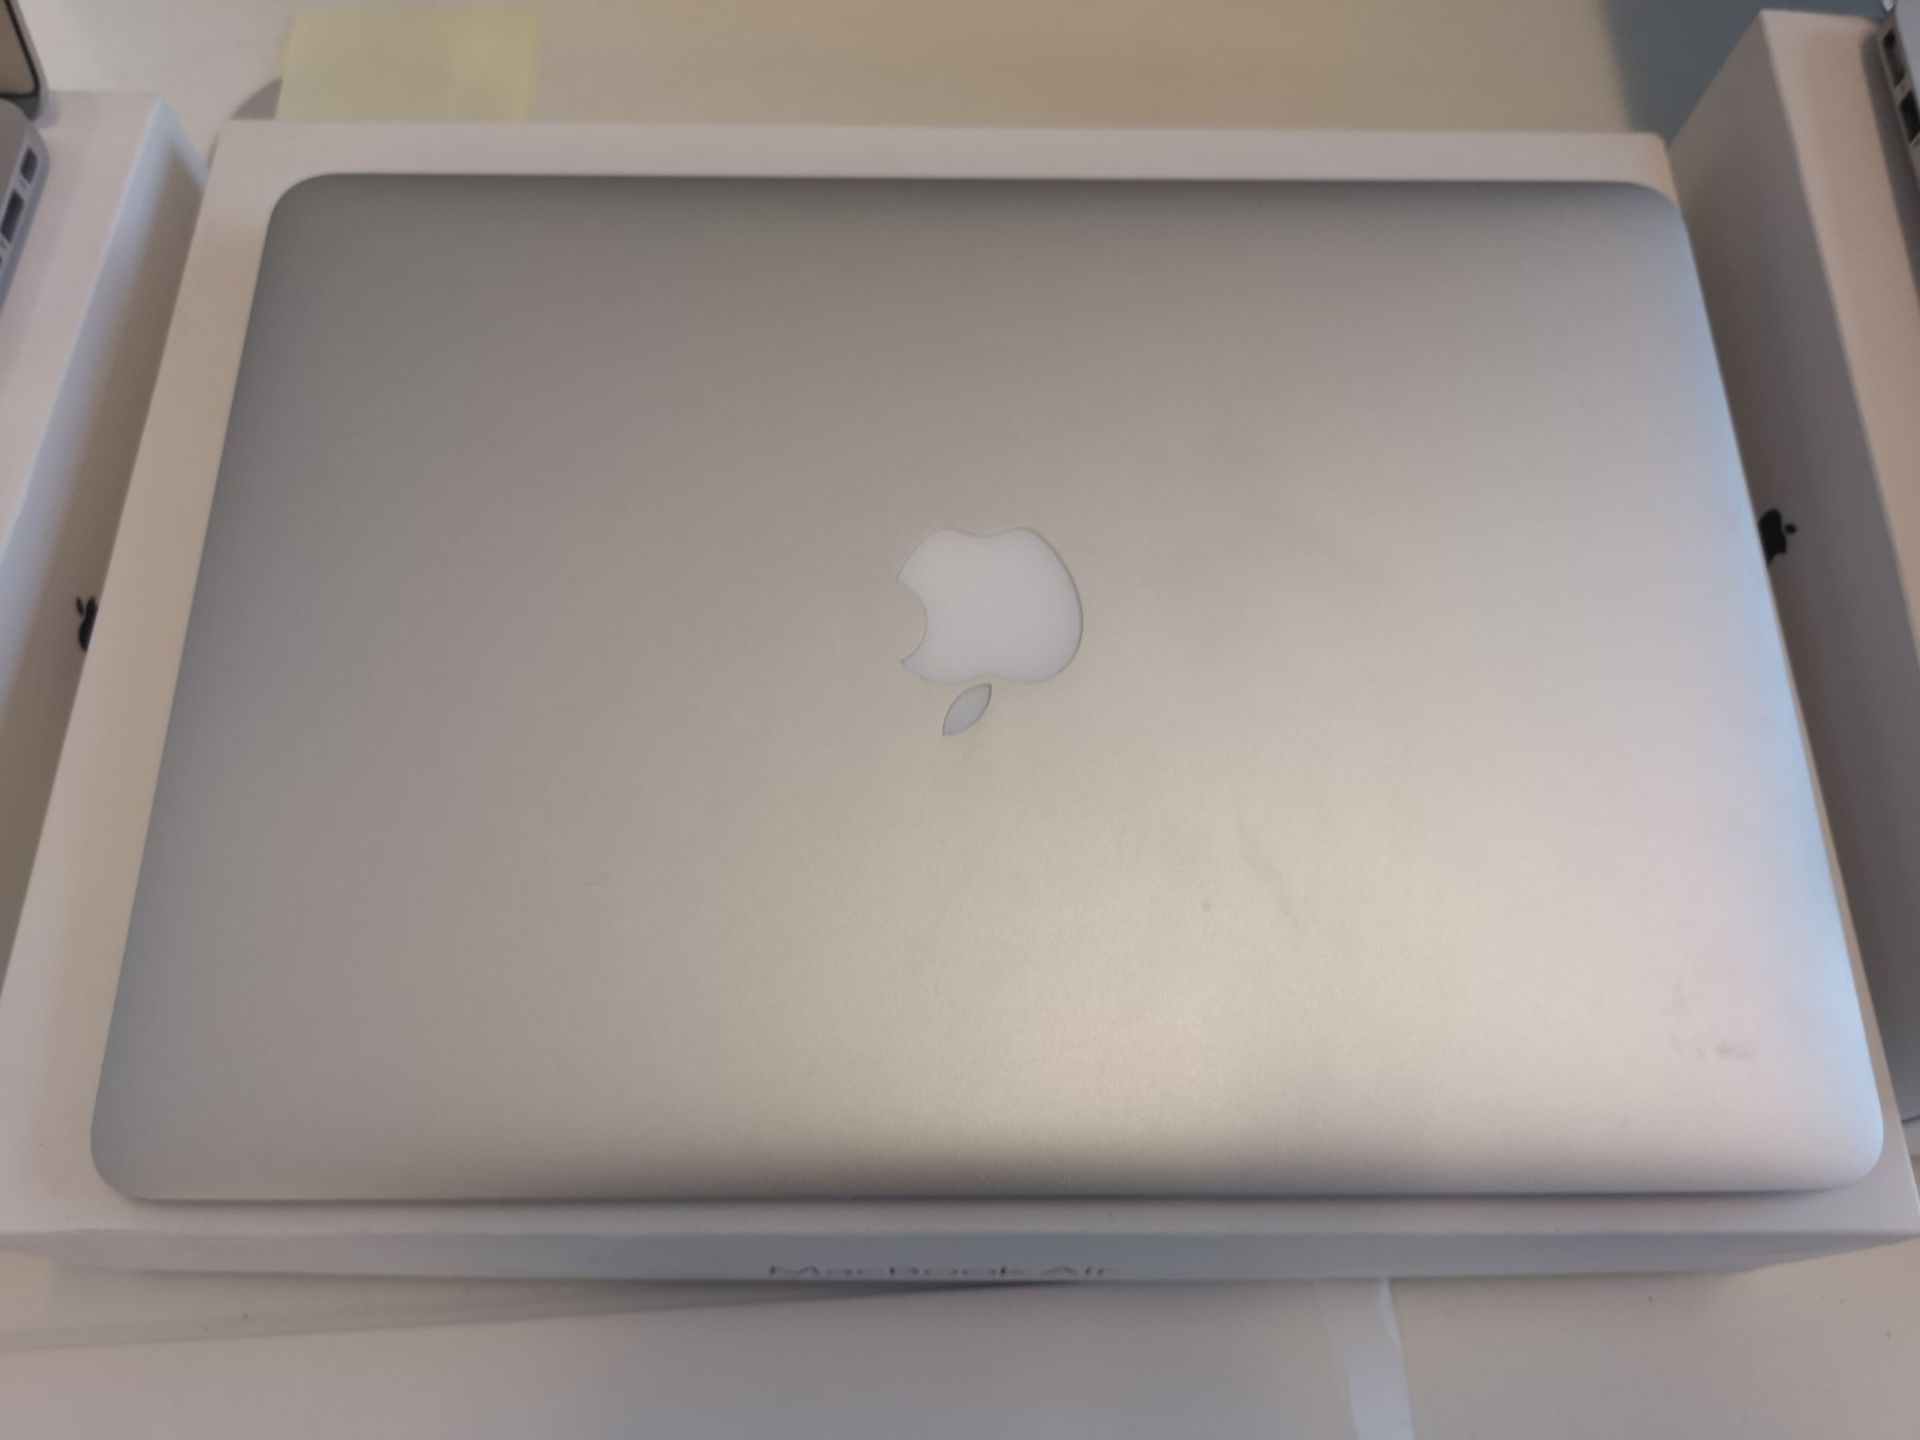 Apple MacBook Air "Core i5" 1.6 13" (Early 2015) - Image 2 of 3